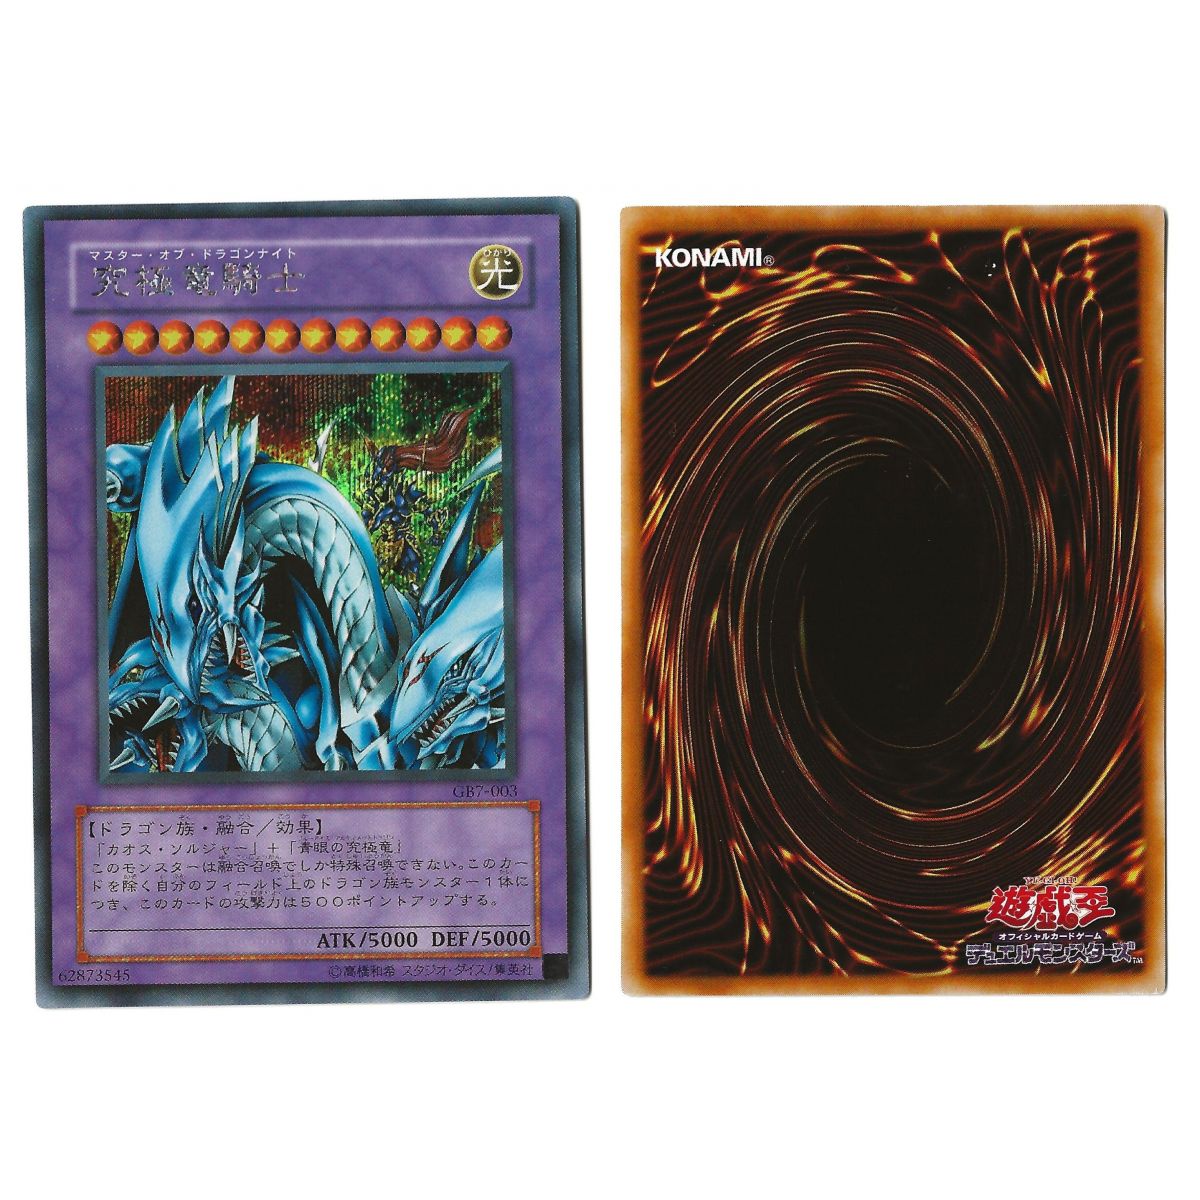 Item Dragon Master Knight GB7-003 Yu-Gi-Oh! Duel Monster 7: The Duel City Legend Promotional Cards Secret Rare Unlimited Japanese